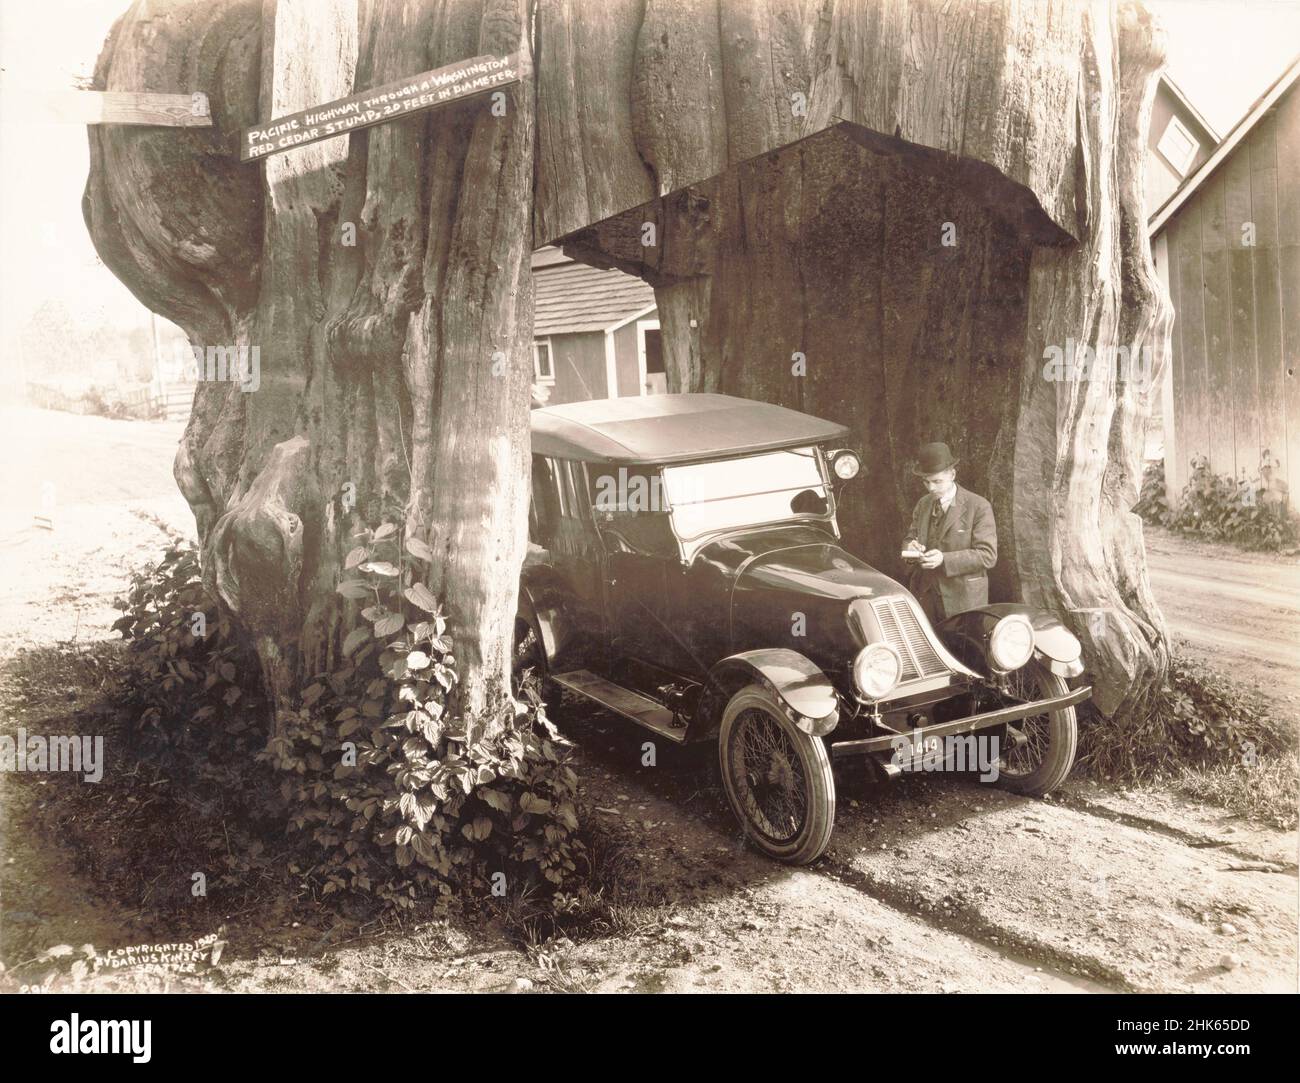 Darius Kinsey - Pacific Highway through a Washington red cedar stump, 20 feet in diameter - man and automobile in tunnel of giant tree stump - 1920. Stock Photo